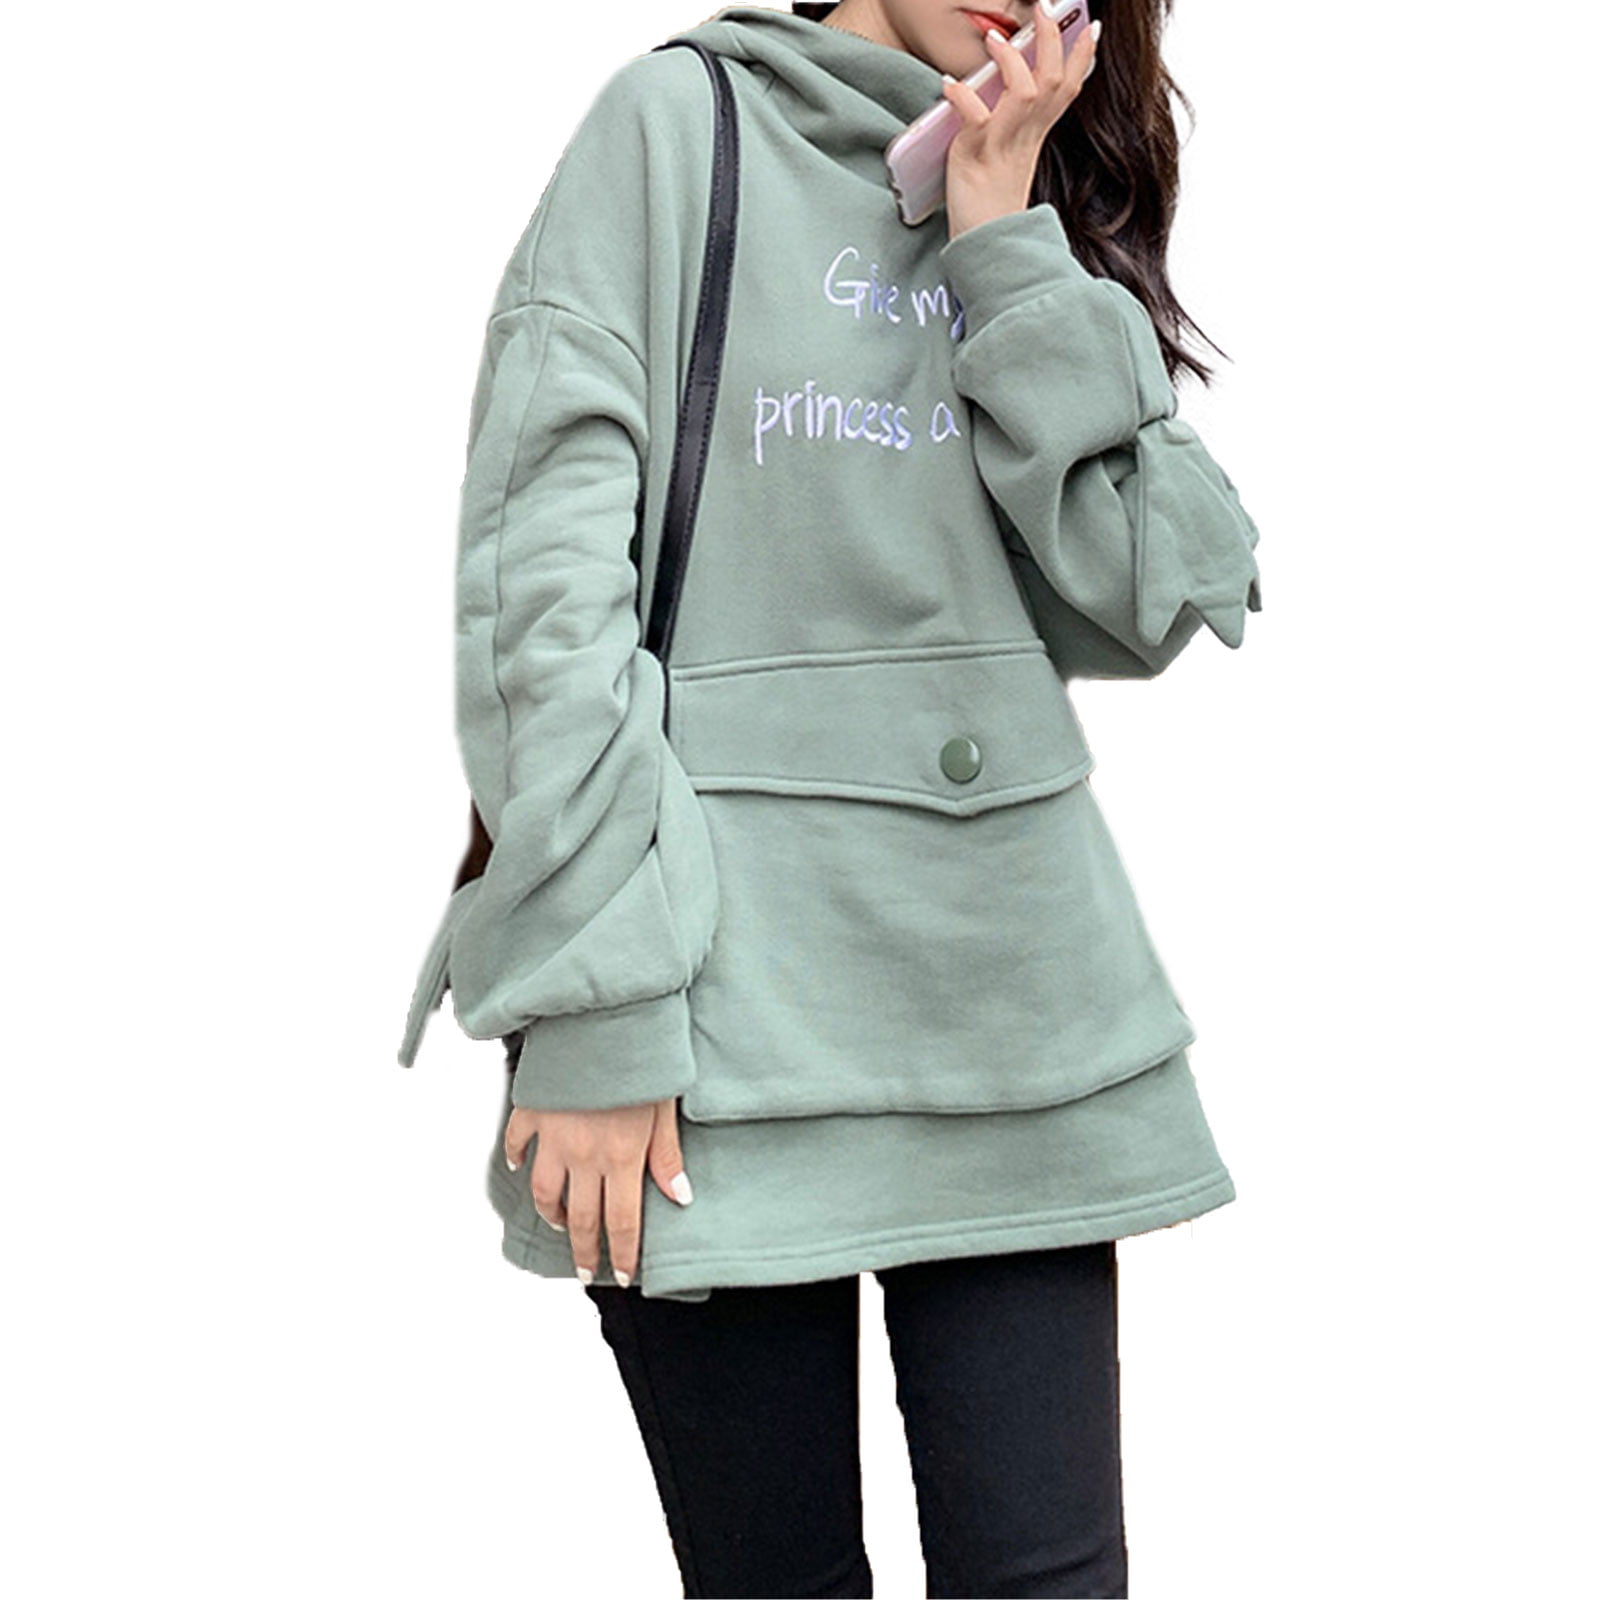 Youth Frog Shadow On The Leaf Boys Girls Casual Pullover Hoodies Pocket Sweatshirts Sweaters With Big Pockets